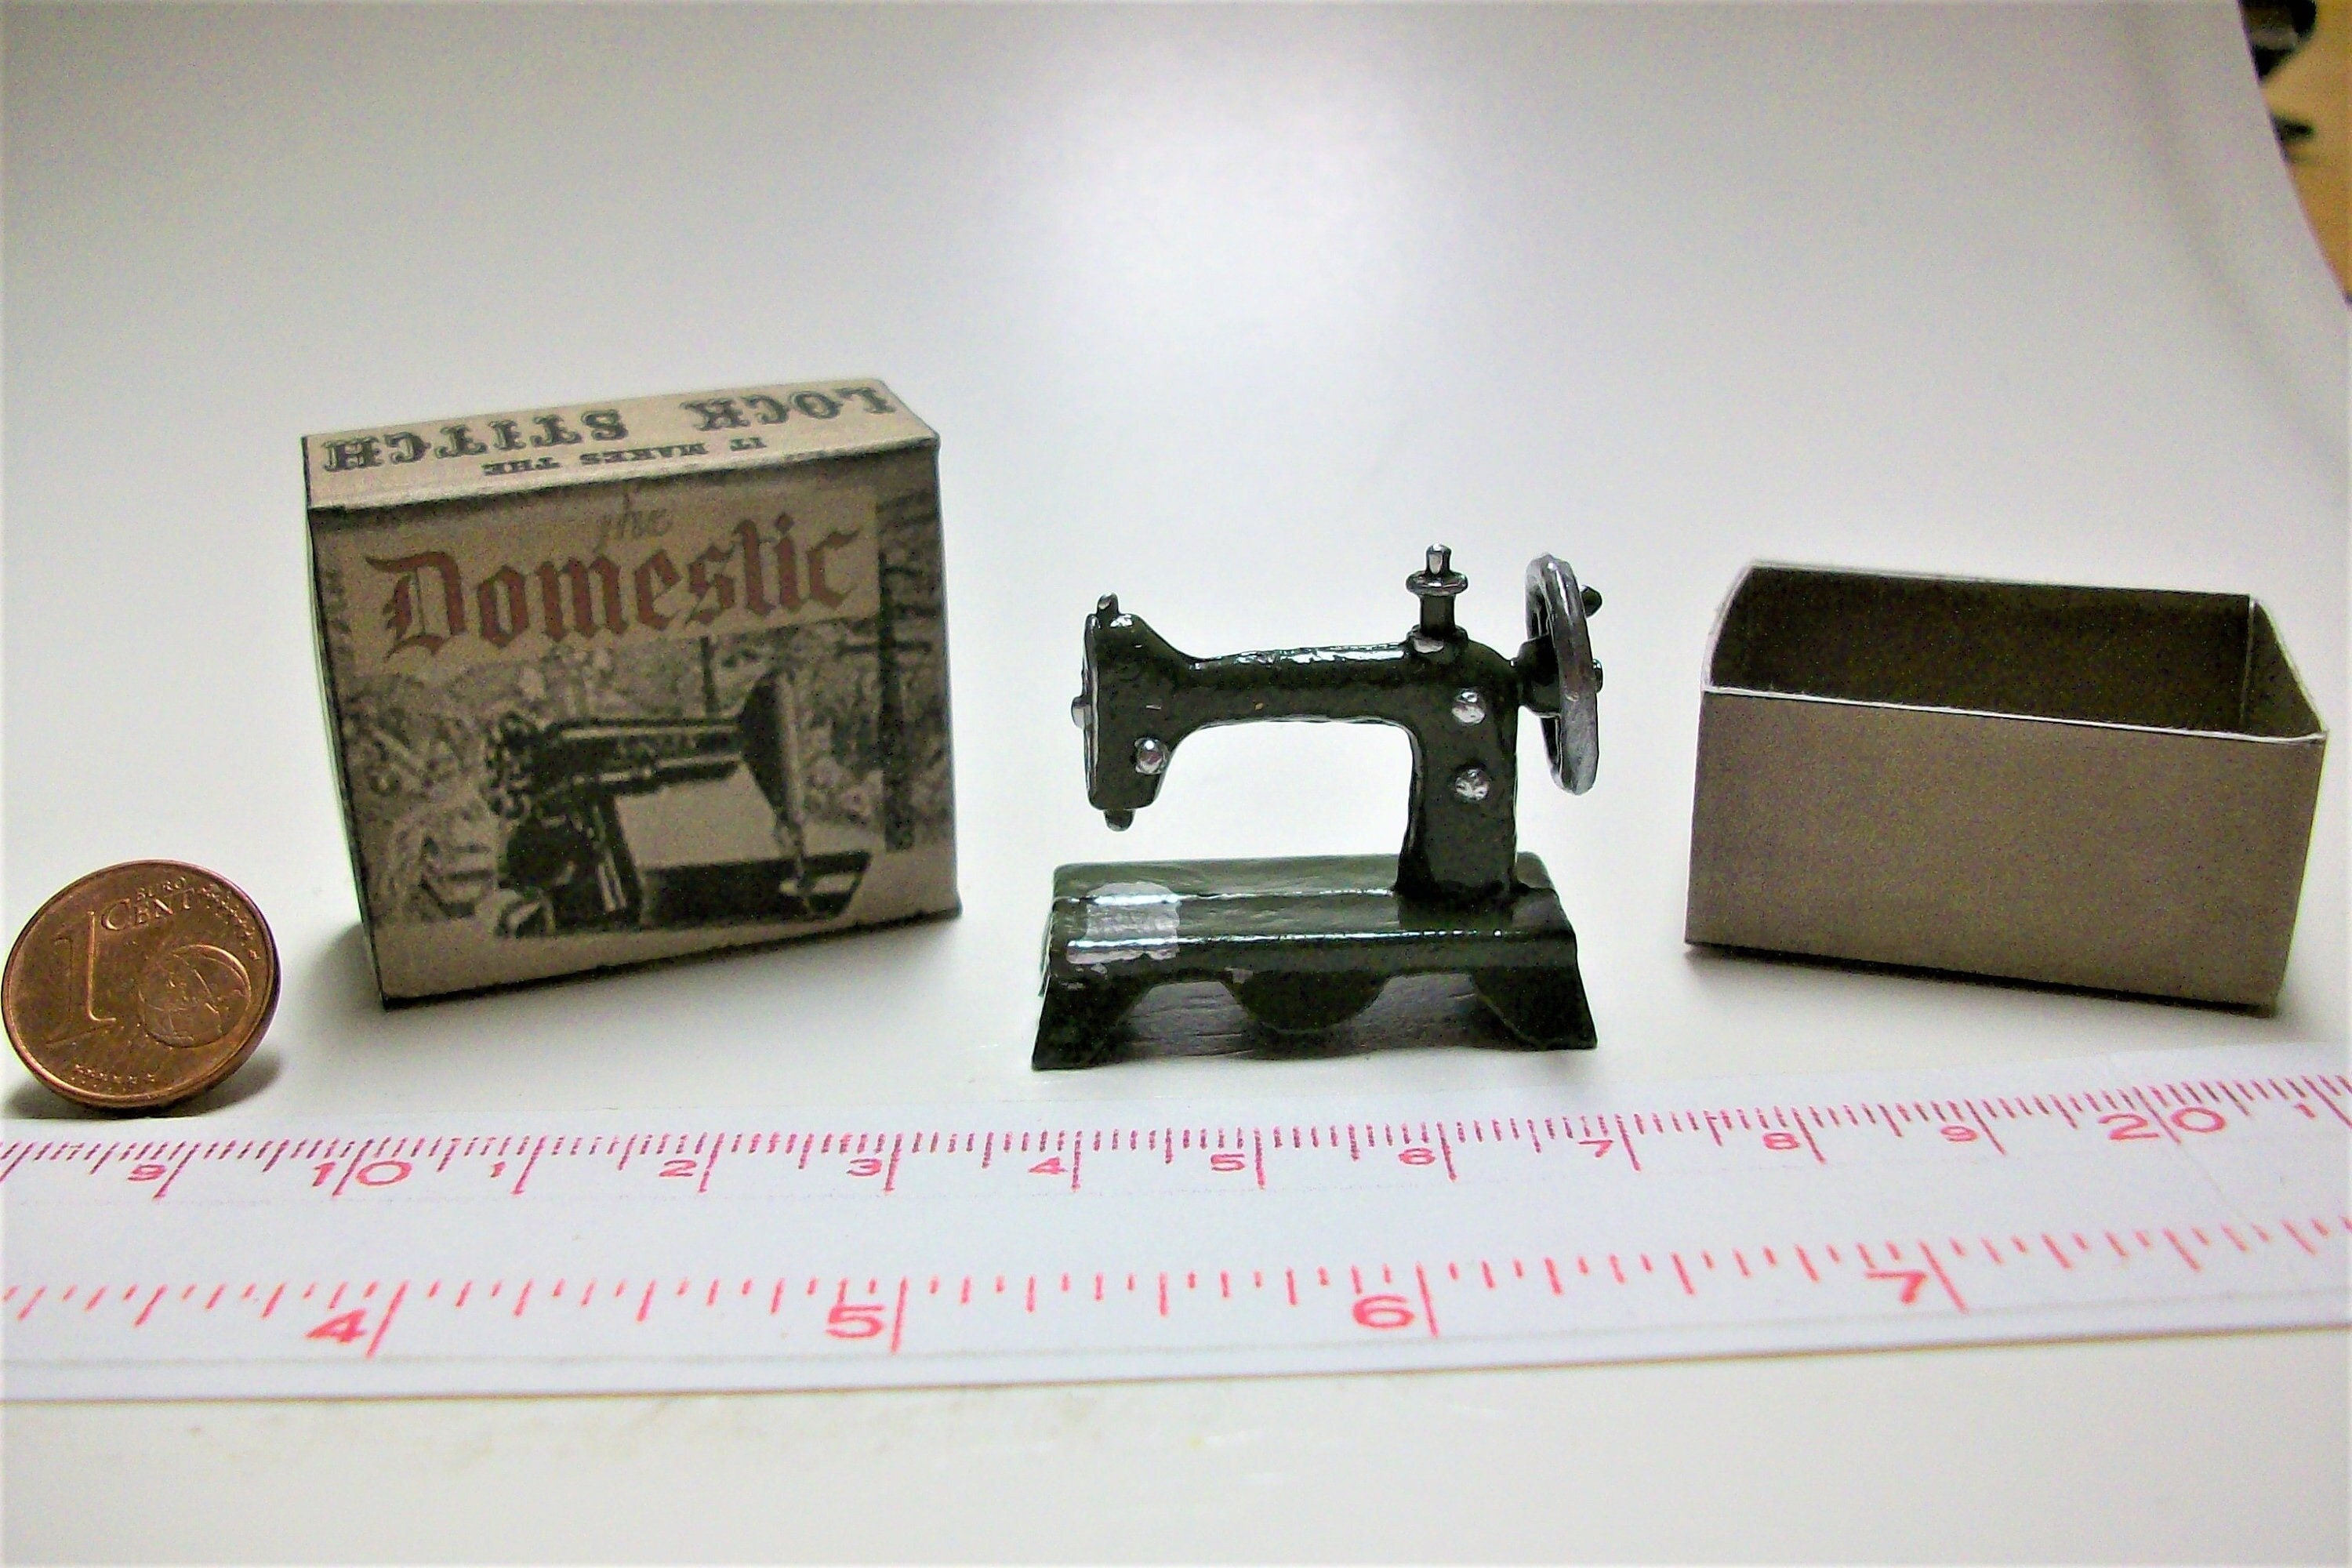 Black Sewing Machine, Portable Old Fashioned, with Accessories – Dollhouse  Junction